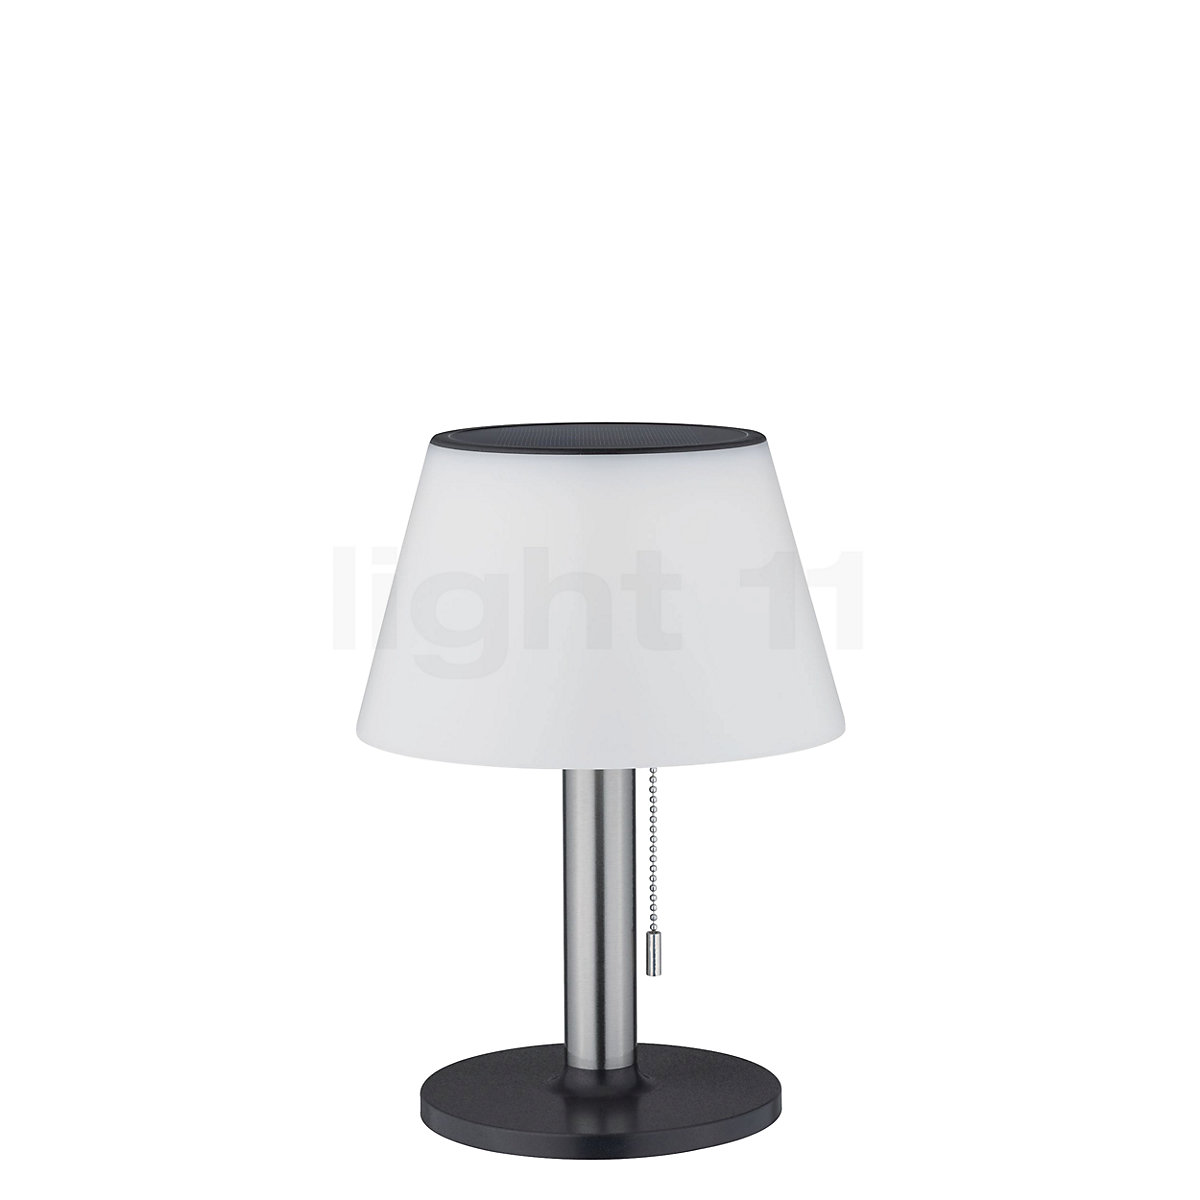 Moskee Volg ons Luik Buy Paulmann Lillesol Table Lamp LED with Solar at